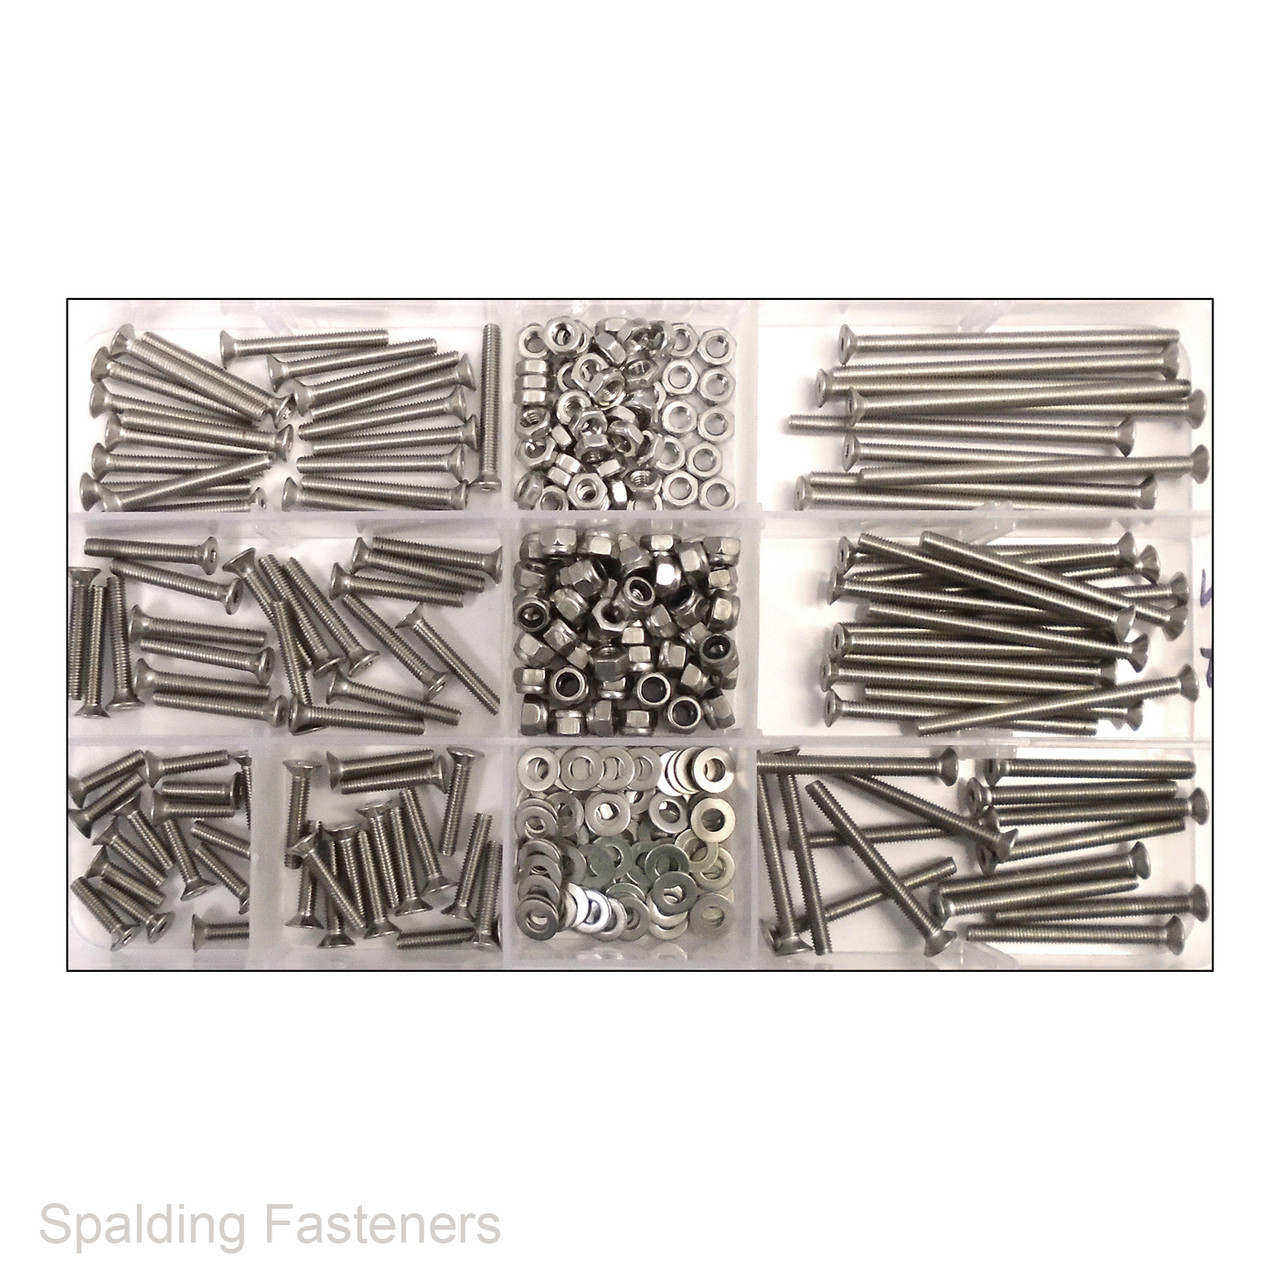 Assorted M3 Metric A2 Stainless Steel Countersunk Socket Screws, Nuts & Washers